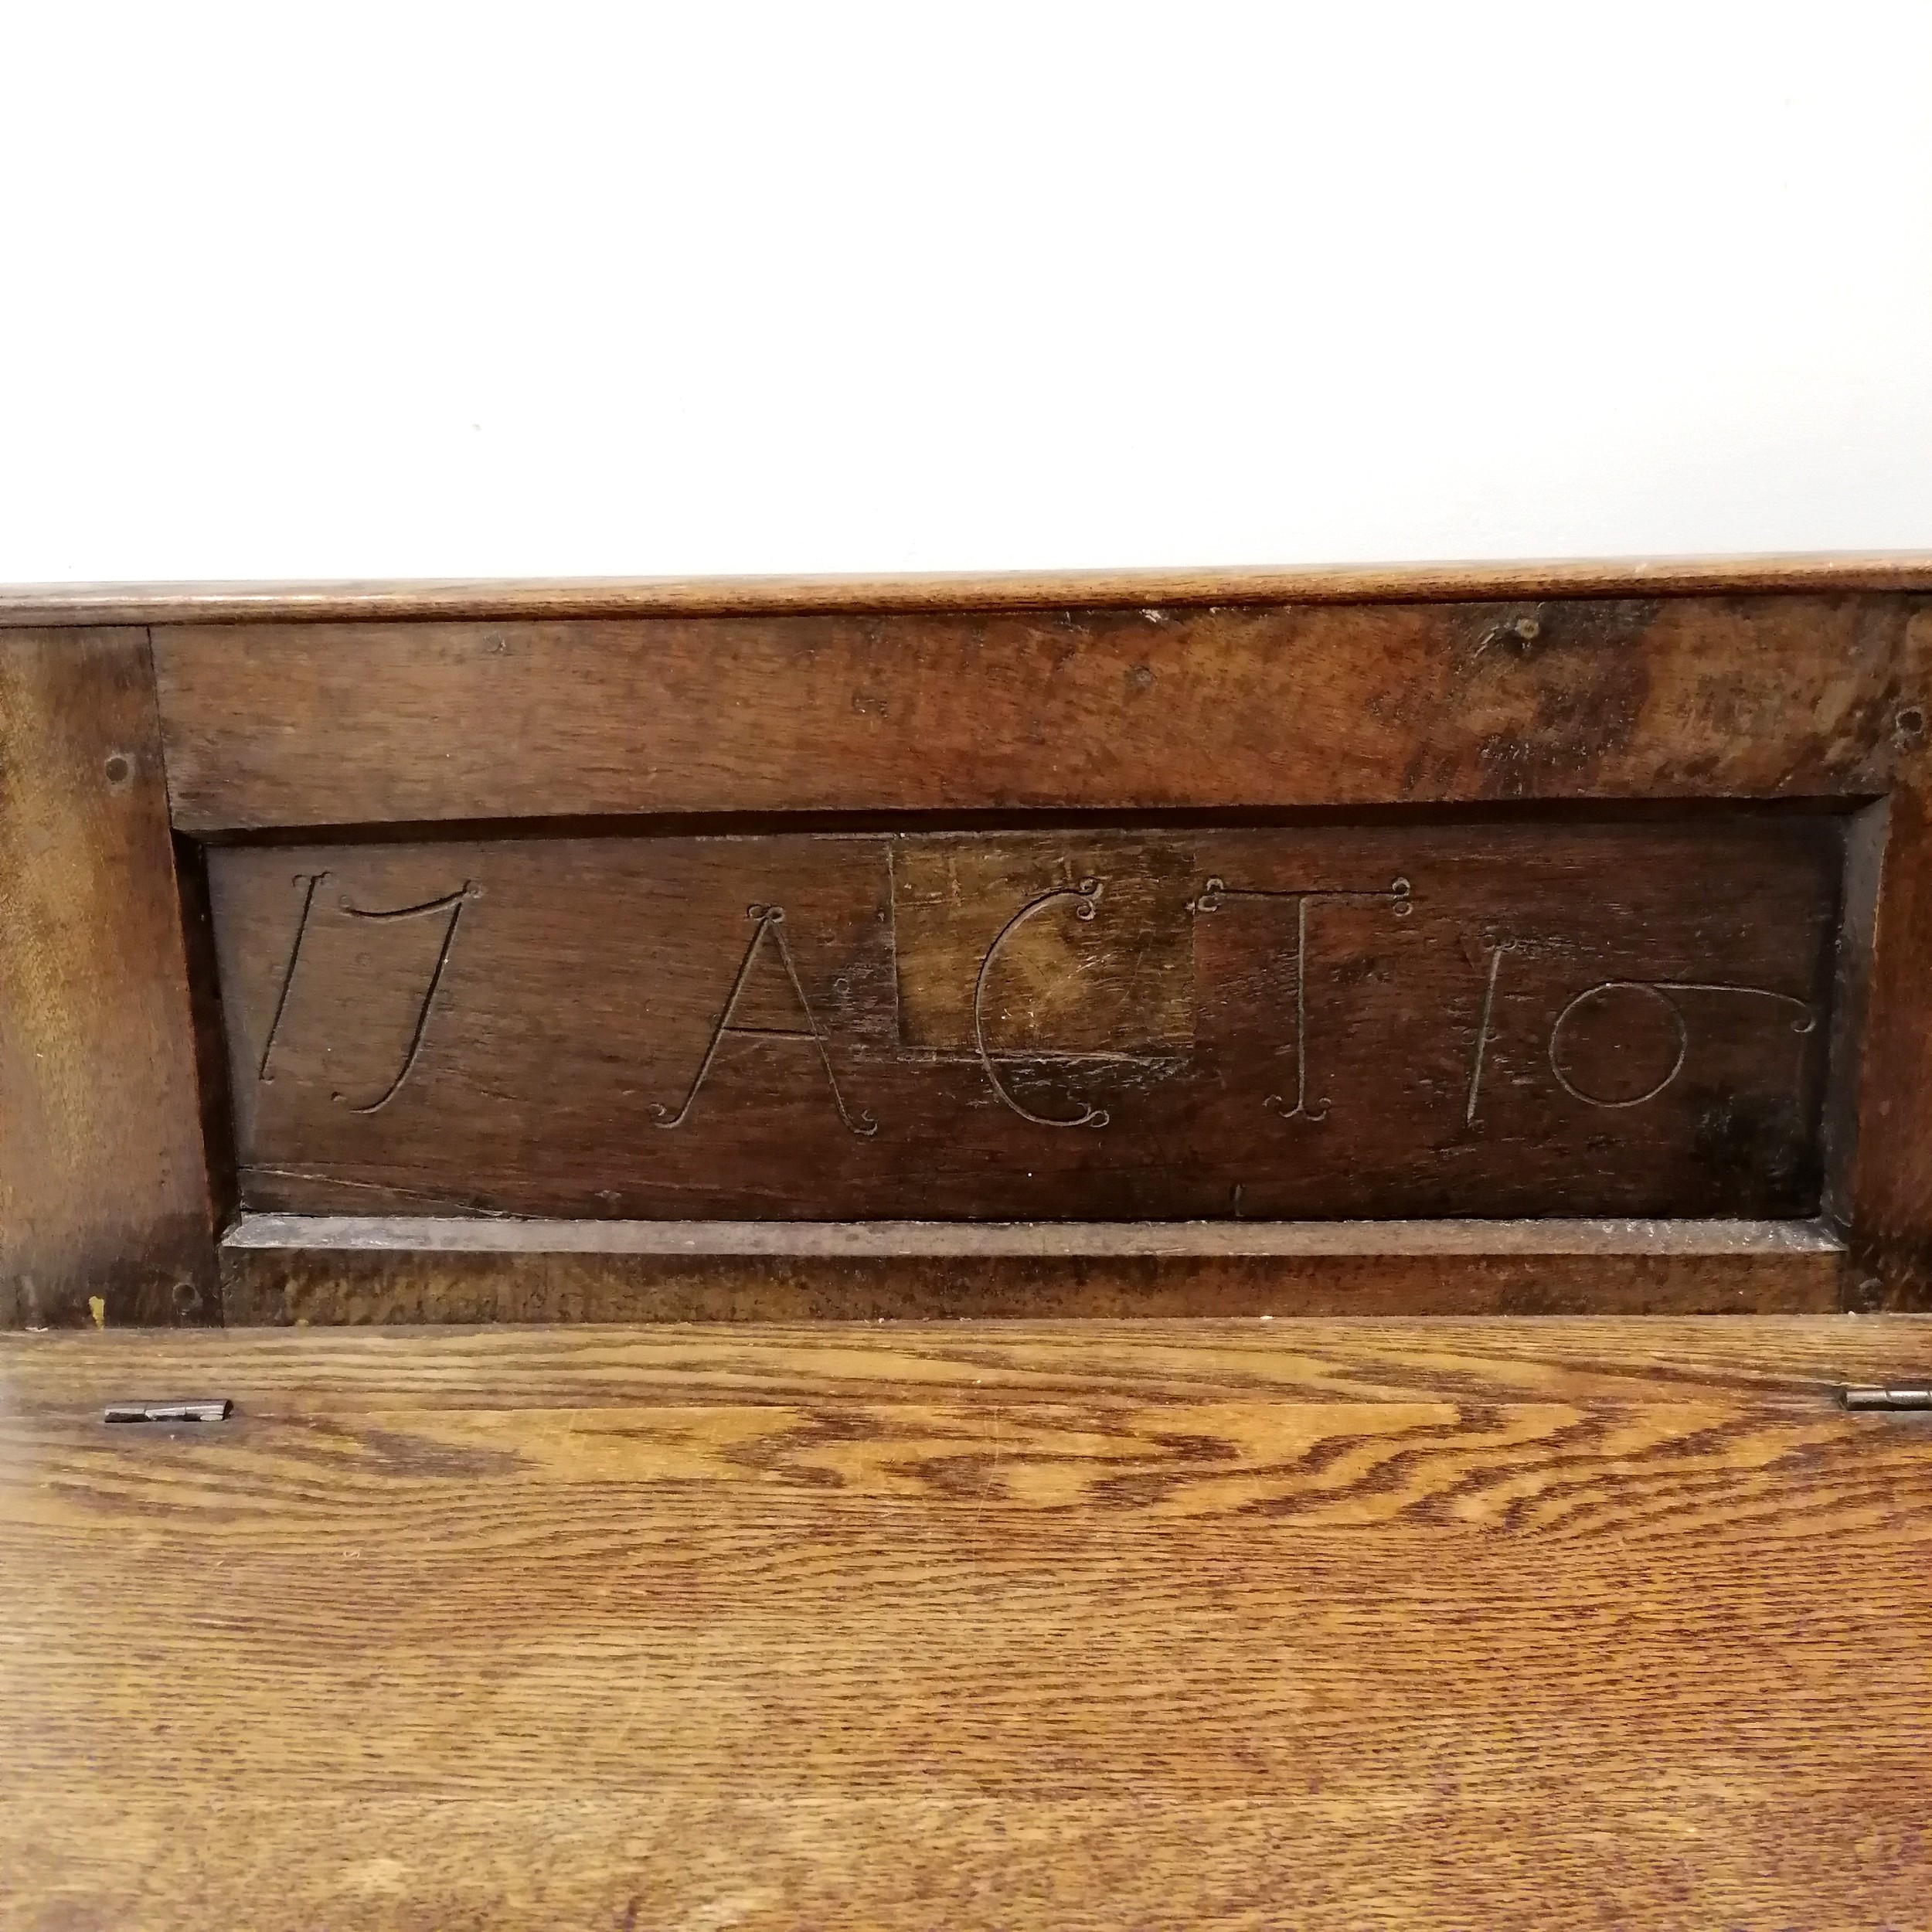 Antique oak hall seat dated and initialled 1710 ACT, possibly made from a coffer, 74 cm wide x 37 cm - Image 4 of 5